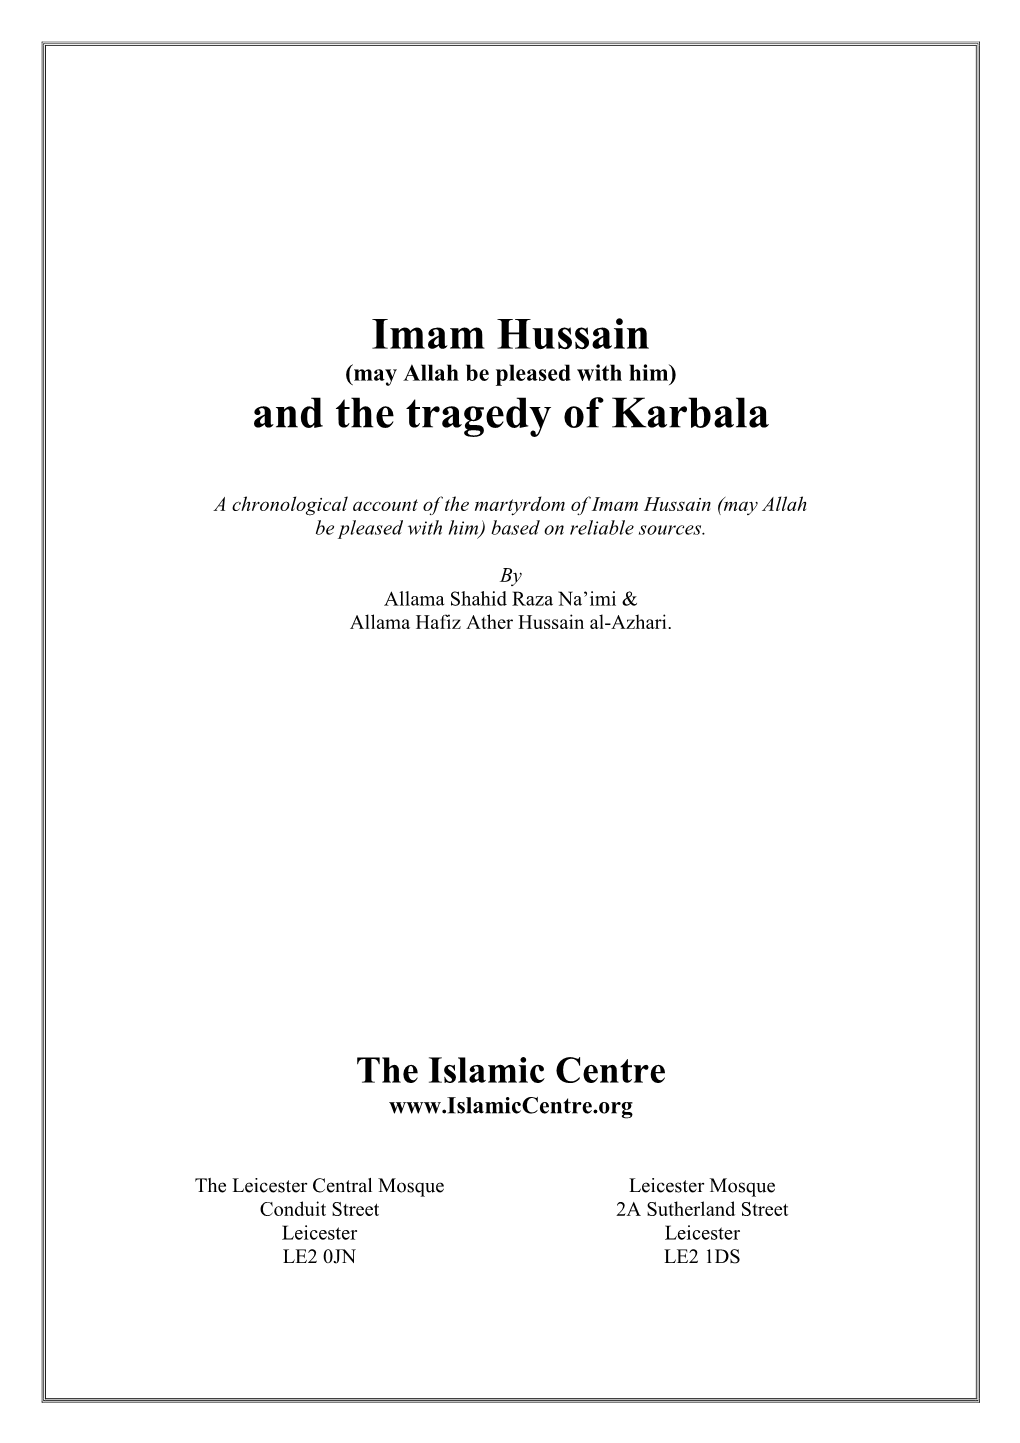 Imam Hussain and the Tragedy of Karbala